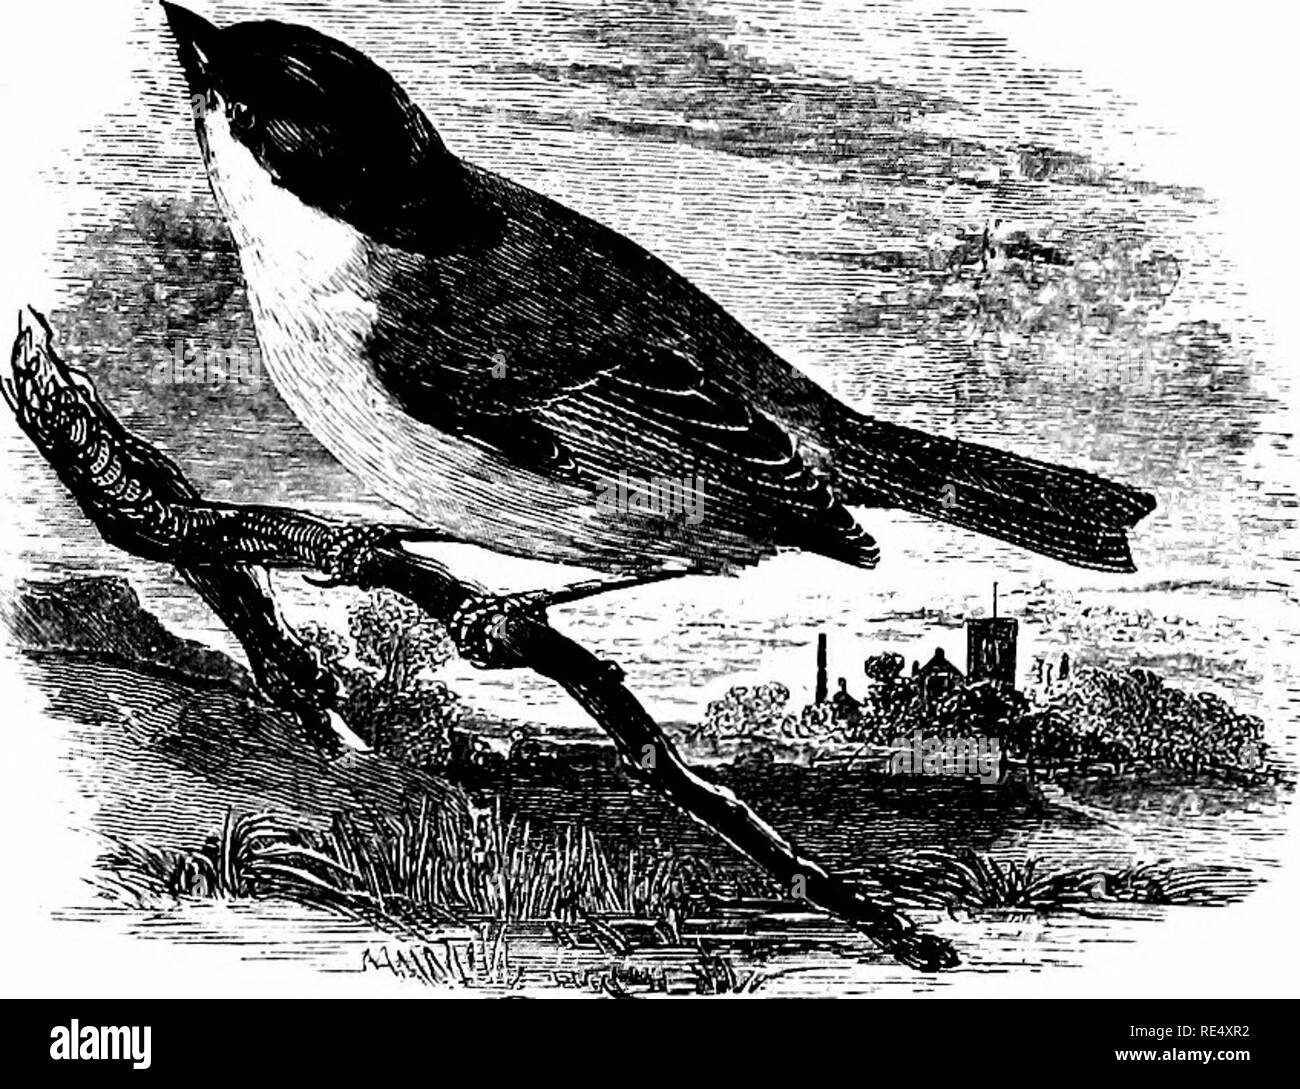 . An illustrated manual of British birds. Birds. PARID^. 107. THE MARSH-TITMOUSE. Parus palustris, Linnaeus. The Marsh-Titmouse is another of our resident species ; but with the exception of the Crested Titmouse it is the least plentiful and the most local of the genus. Its name is somewhat misleading, for the bird may often be seen in orchards and gardens, and even in pine-woods; but it is partial to the vicinity of rivers, and to the alders and pollarded willows which flourish on swampy ground. In England, and in suitable parts of Wales, it is fairly common ; but in Scotland it is local, and Stock Photo